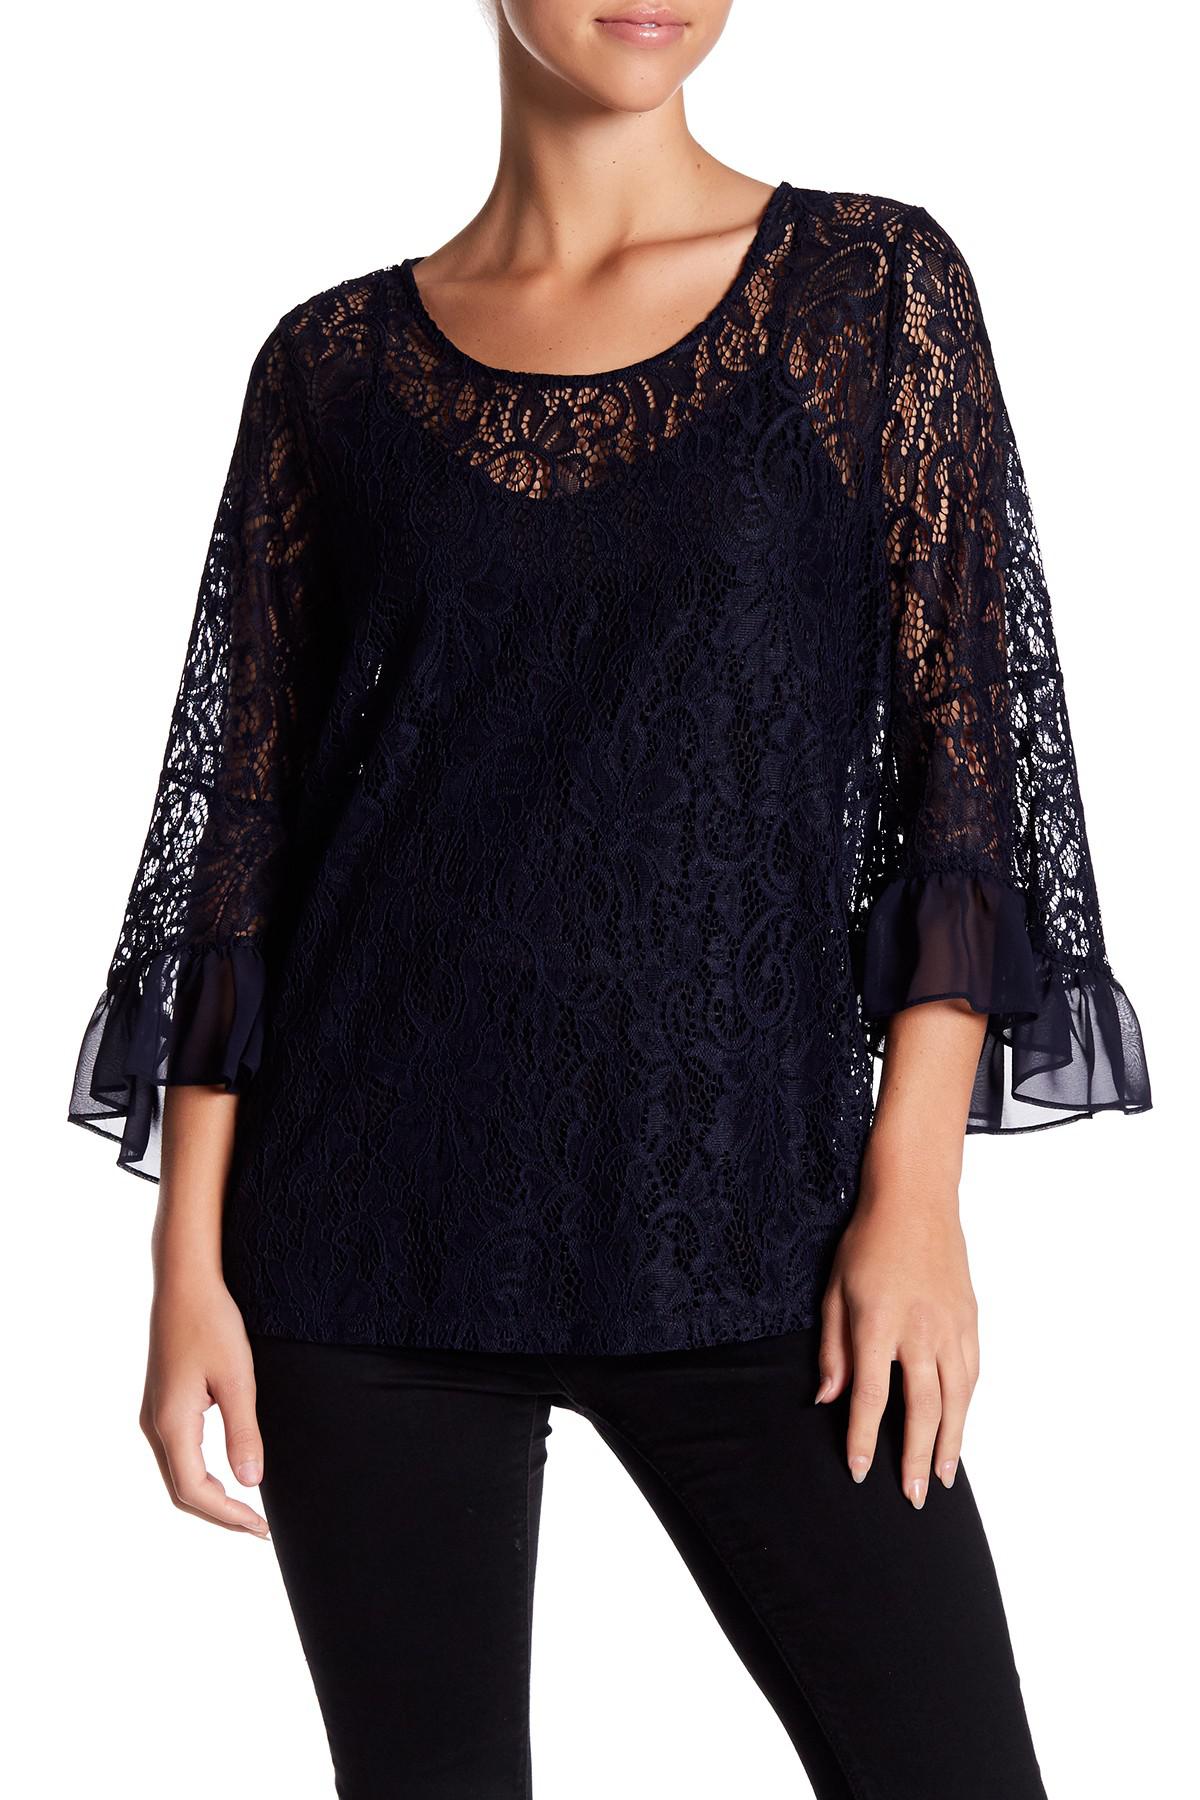 Pleione Bell Sleeve Lace Crew Neck Blouse in Navy (Blue) - Lyst